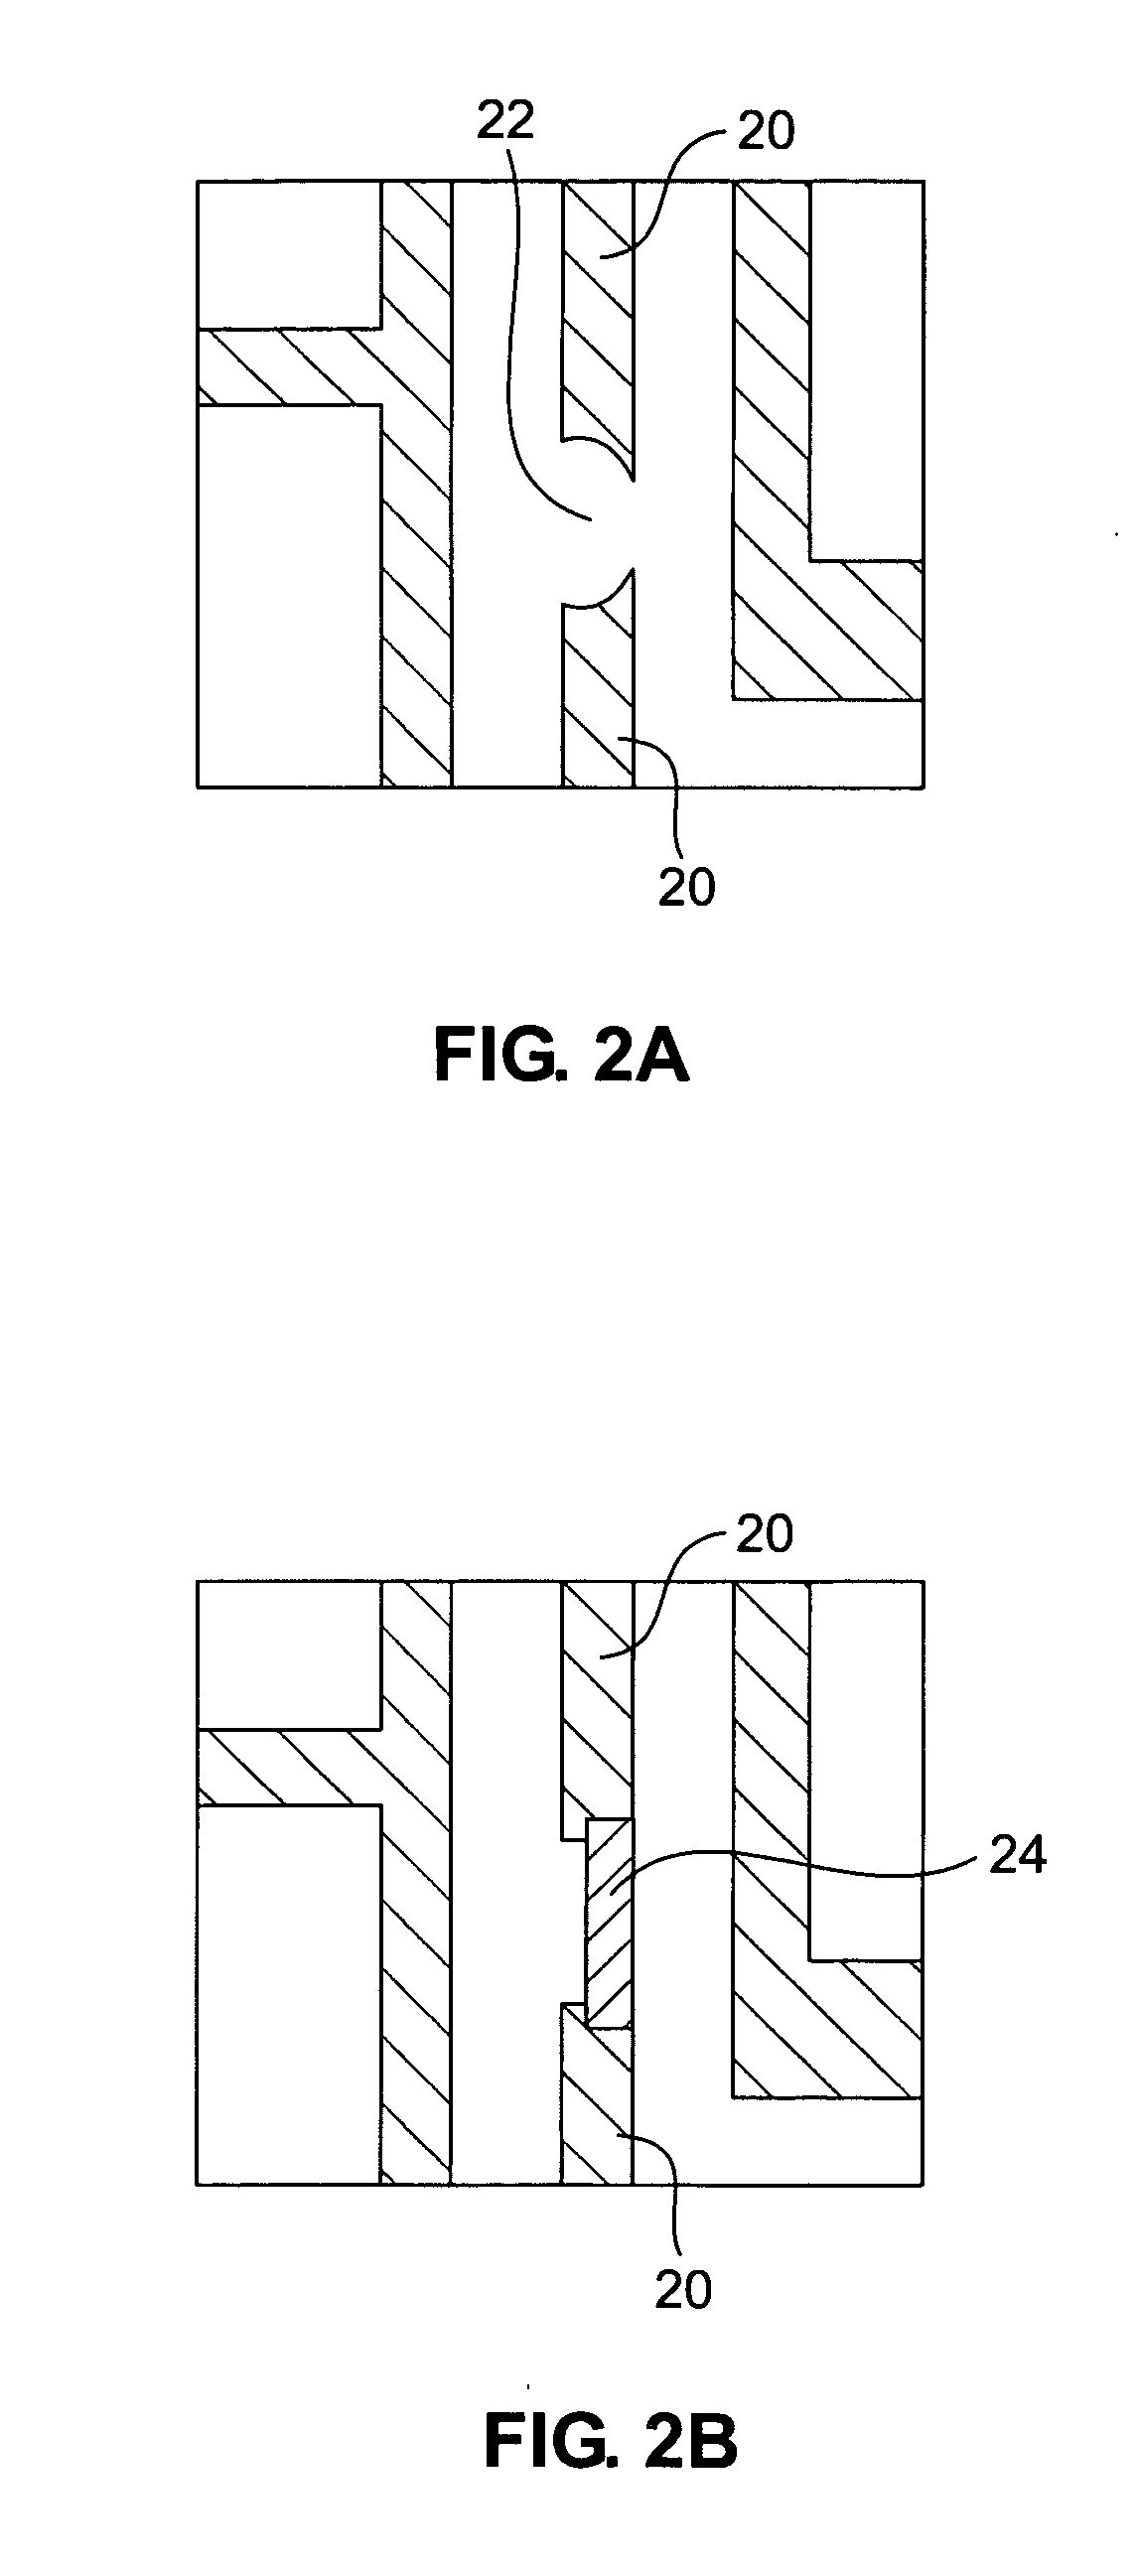 Defect identification system and method for repairing killer defects in semiconductor devices